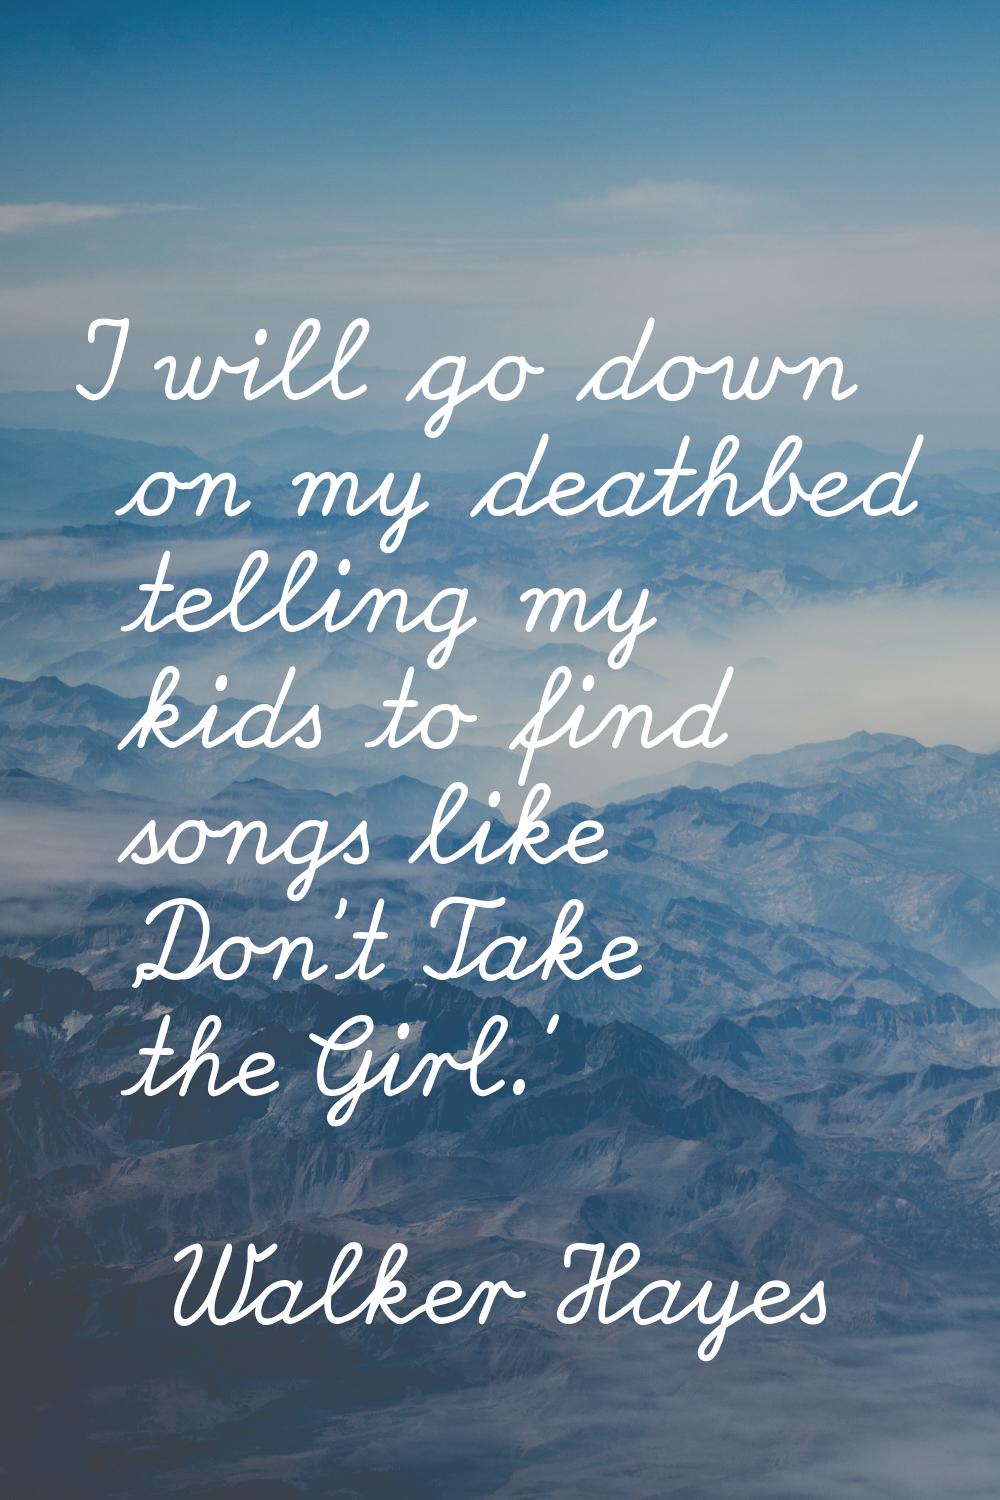 I will go down on my deathbed telling my kids to find songs like 'Don't Take the Girl.'